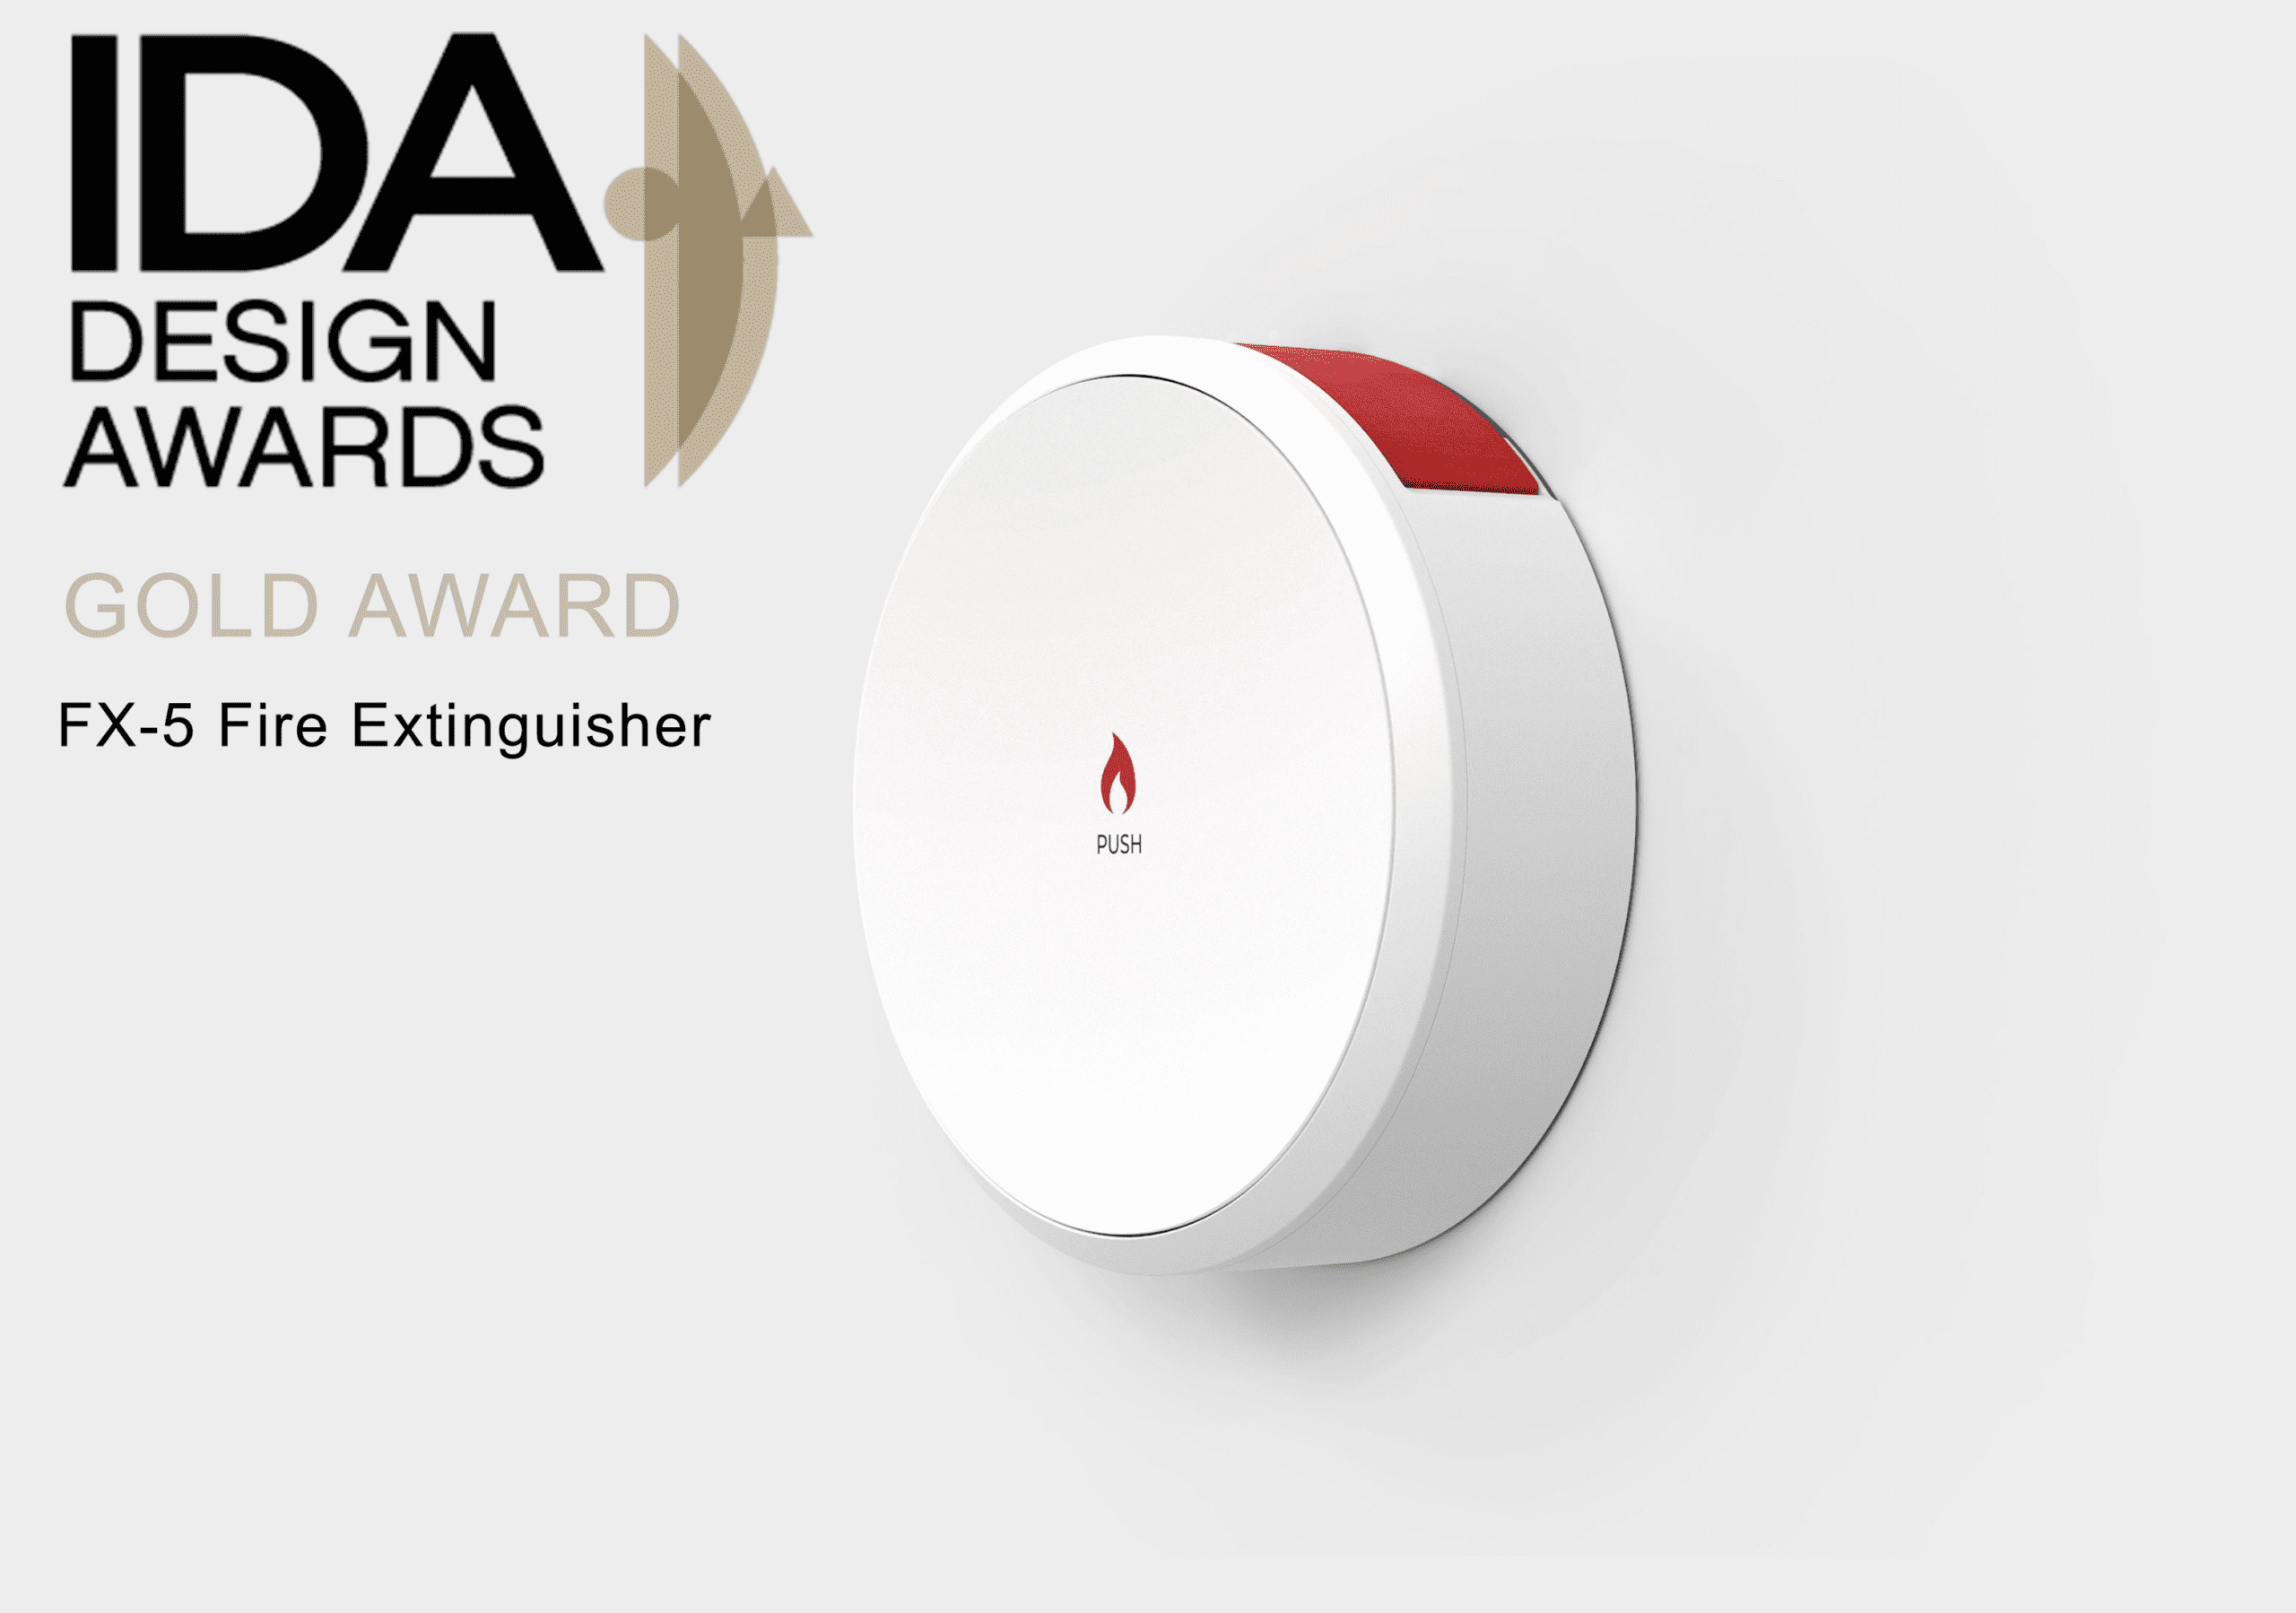 White circular fire extinguisher with a red button on the top and a red fire symbol with the word "Push" in the center. Pictured on a white wall. The title says "IDA Design Awards. Gold Award. FX-5 Fire Extinguisher."